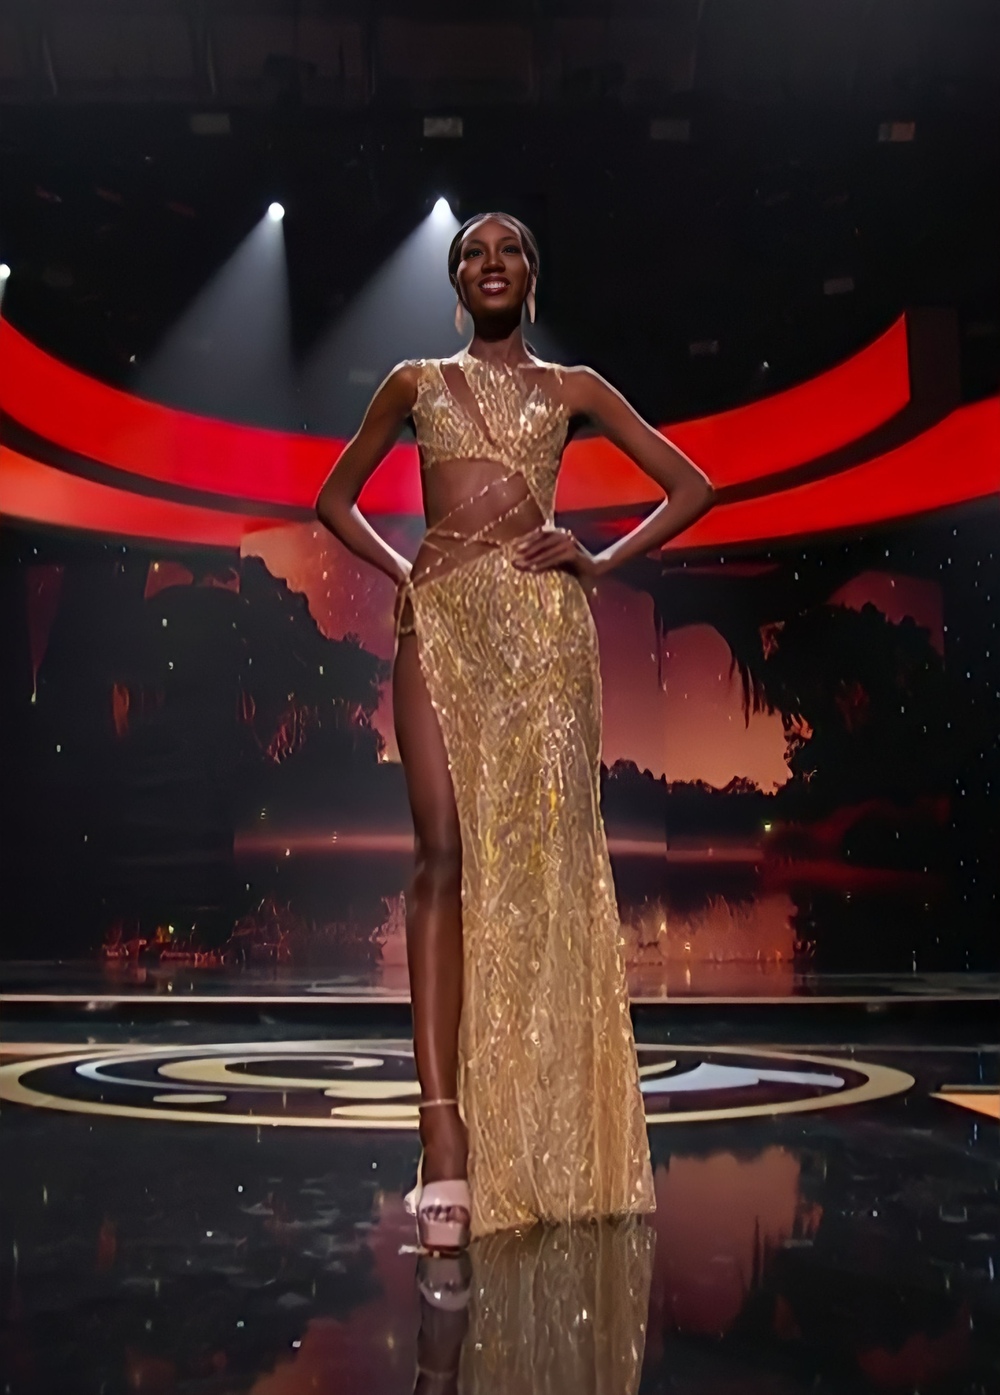 Recap Evening Gowns of Top 10 Finalists and Miss Universe Winner